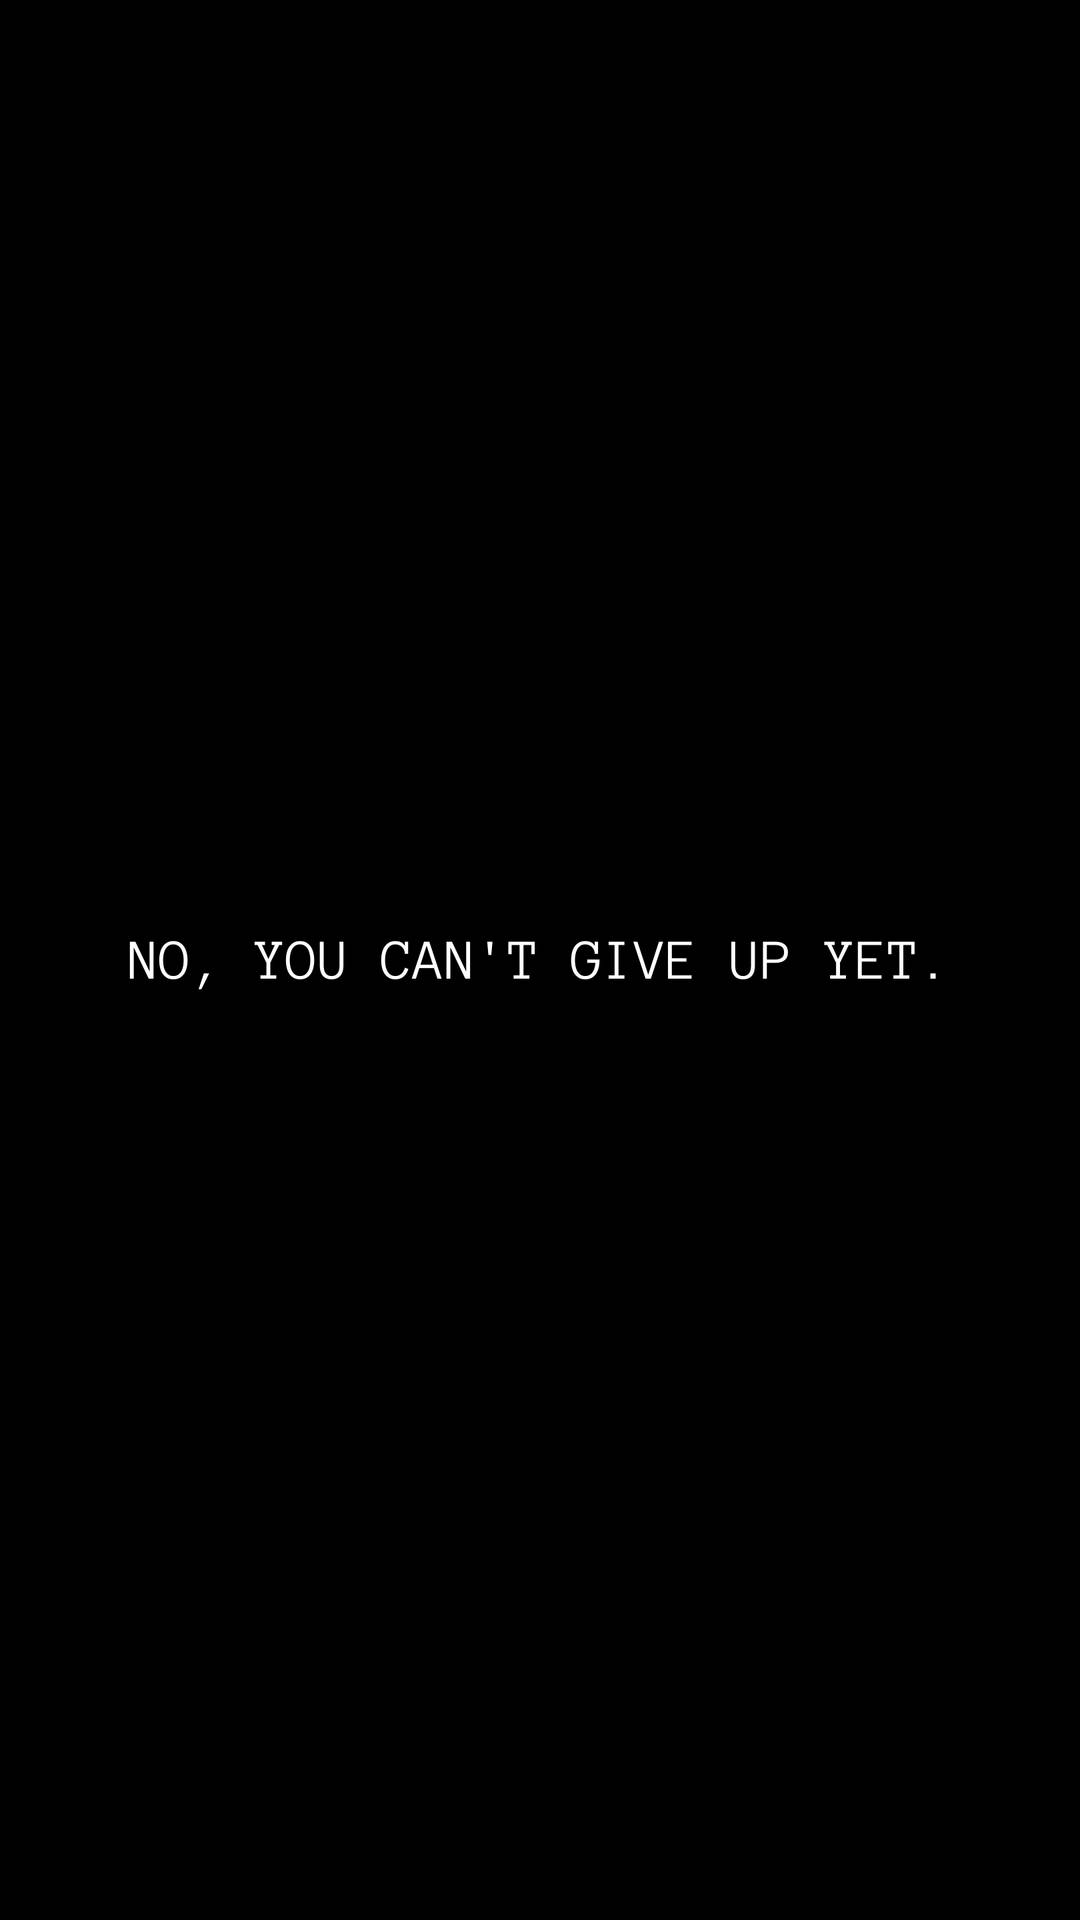 Never Give Up Motivational Quote Wallpaper